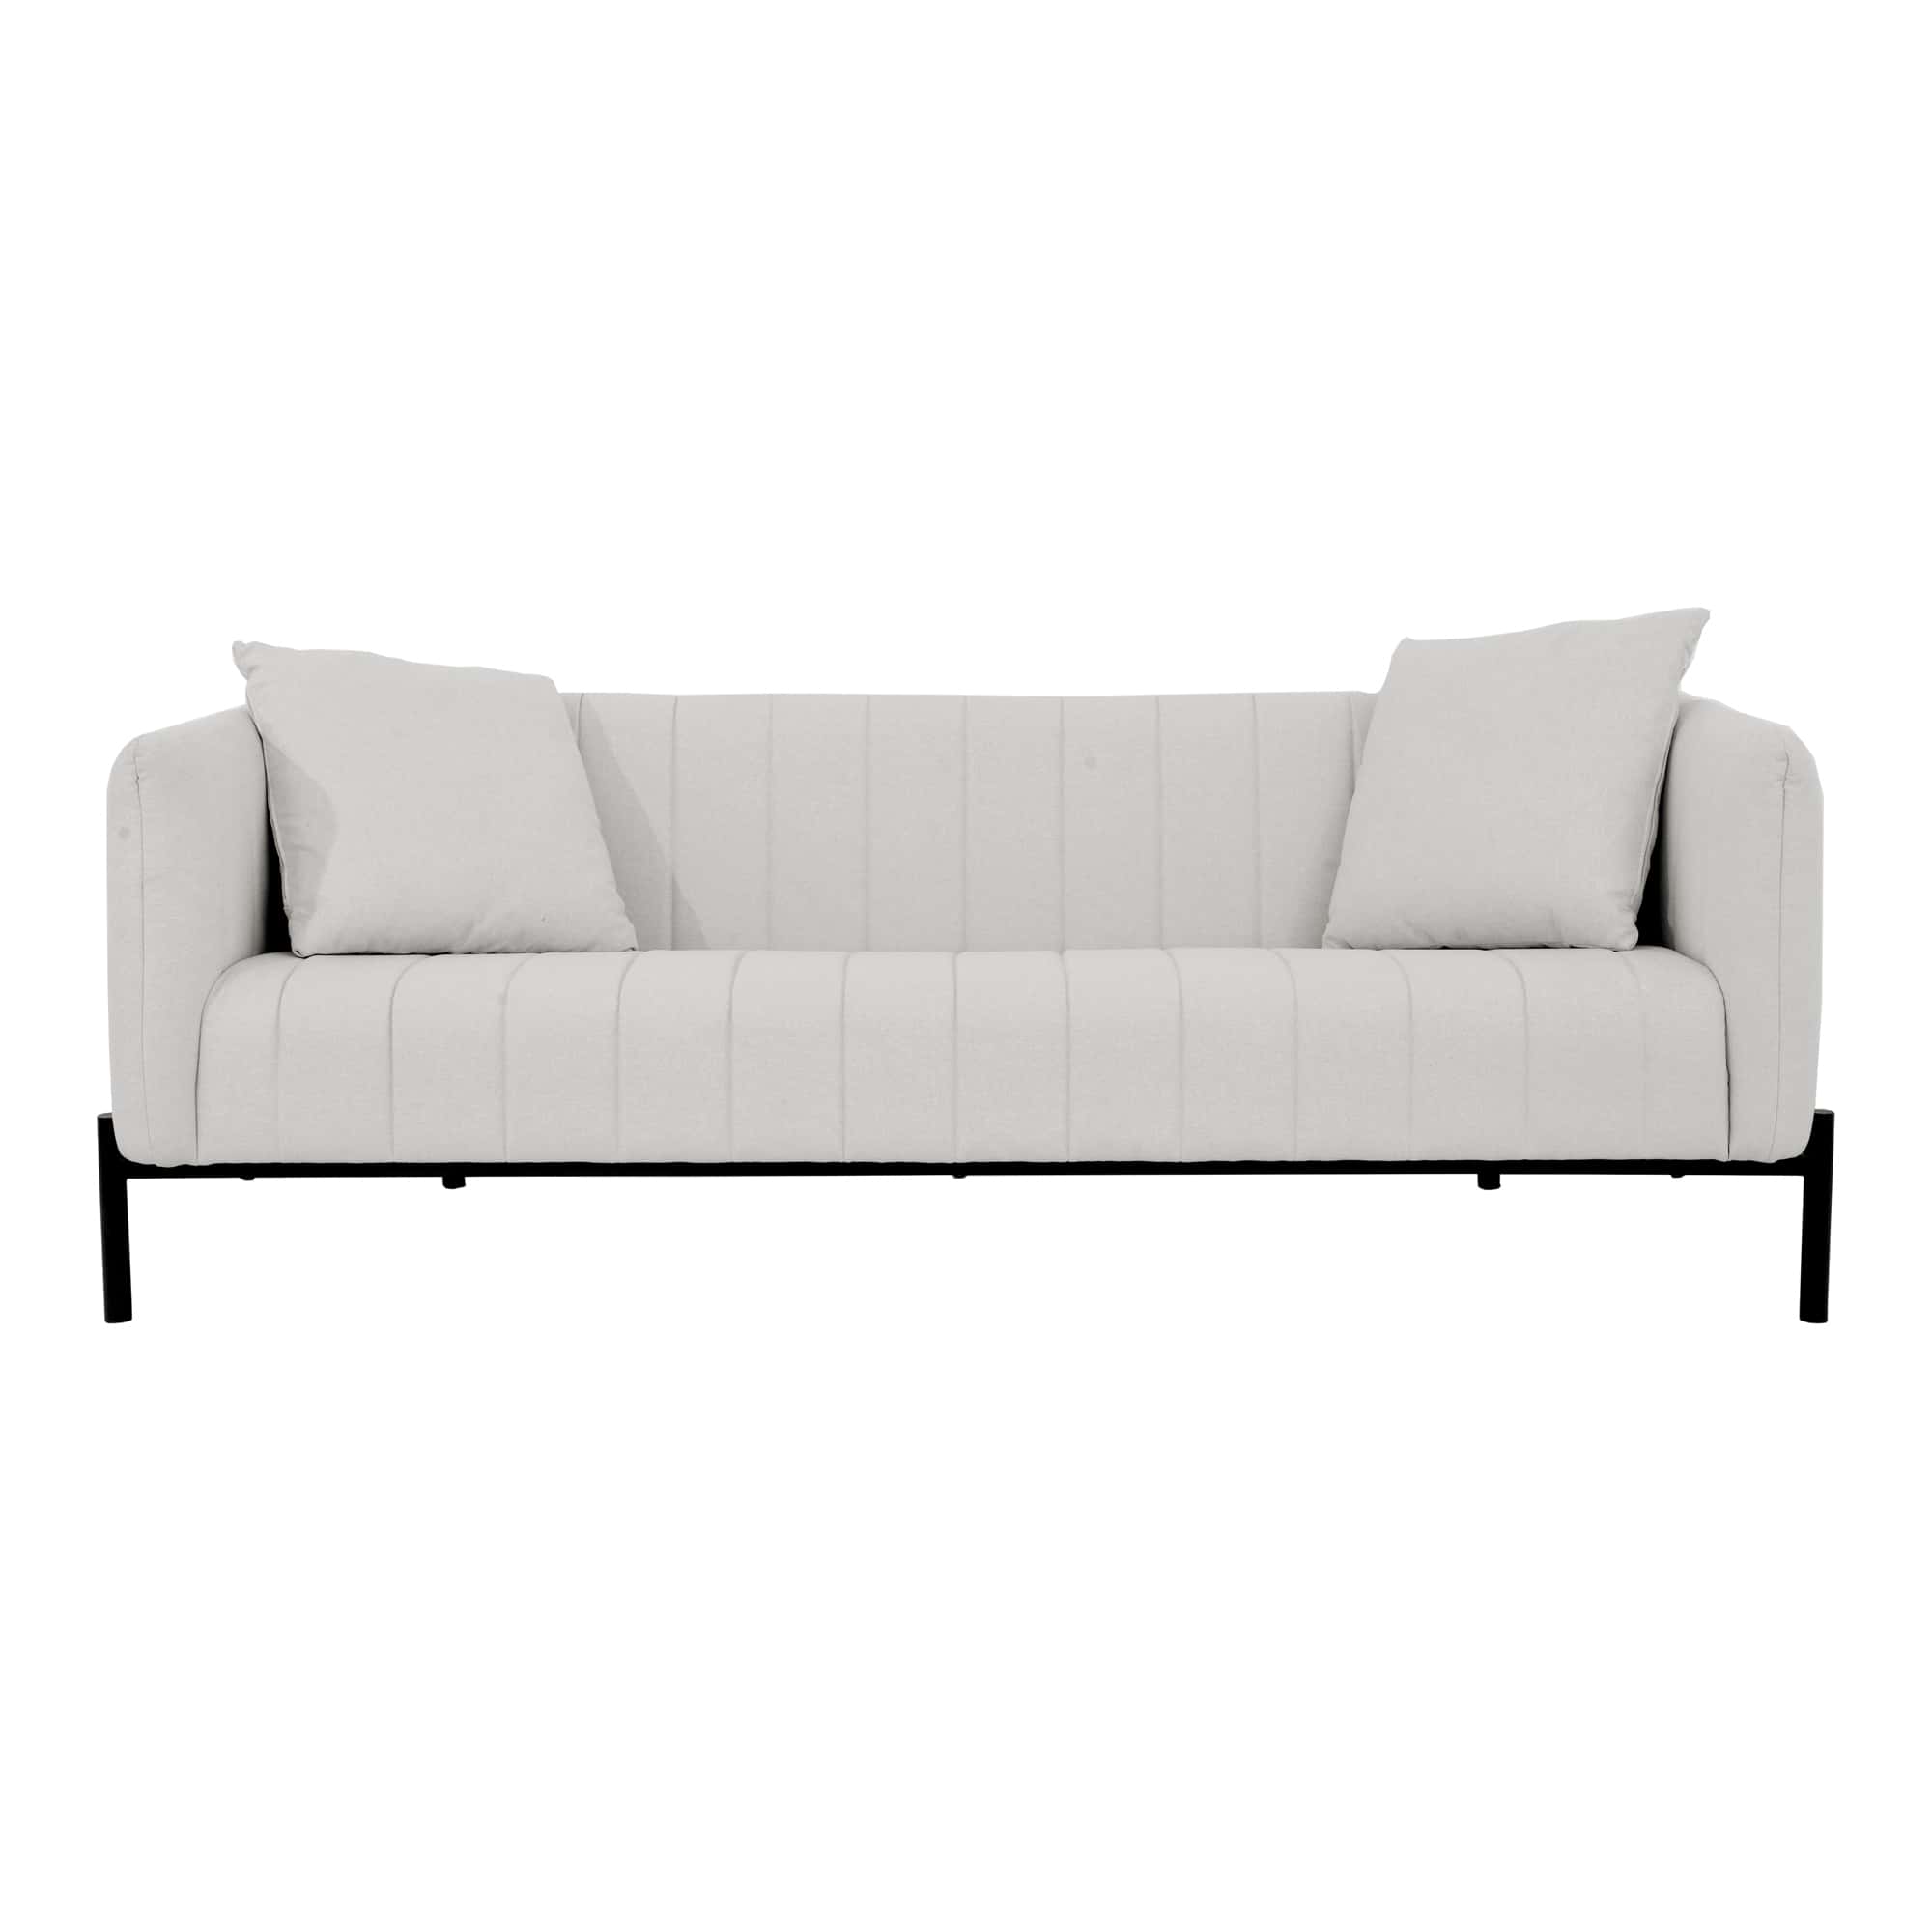 Jaxon Sofa Light by Moe's Home Collection